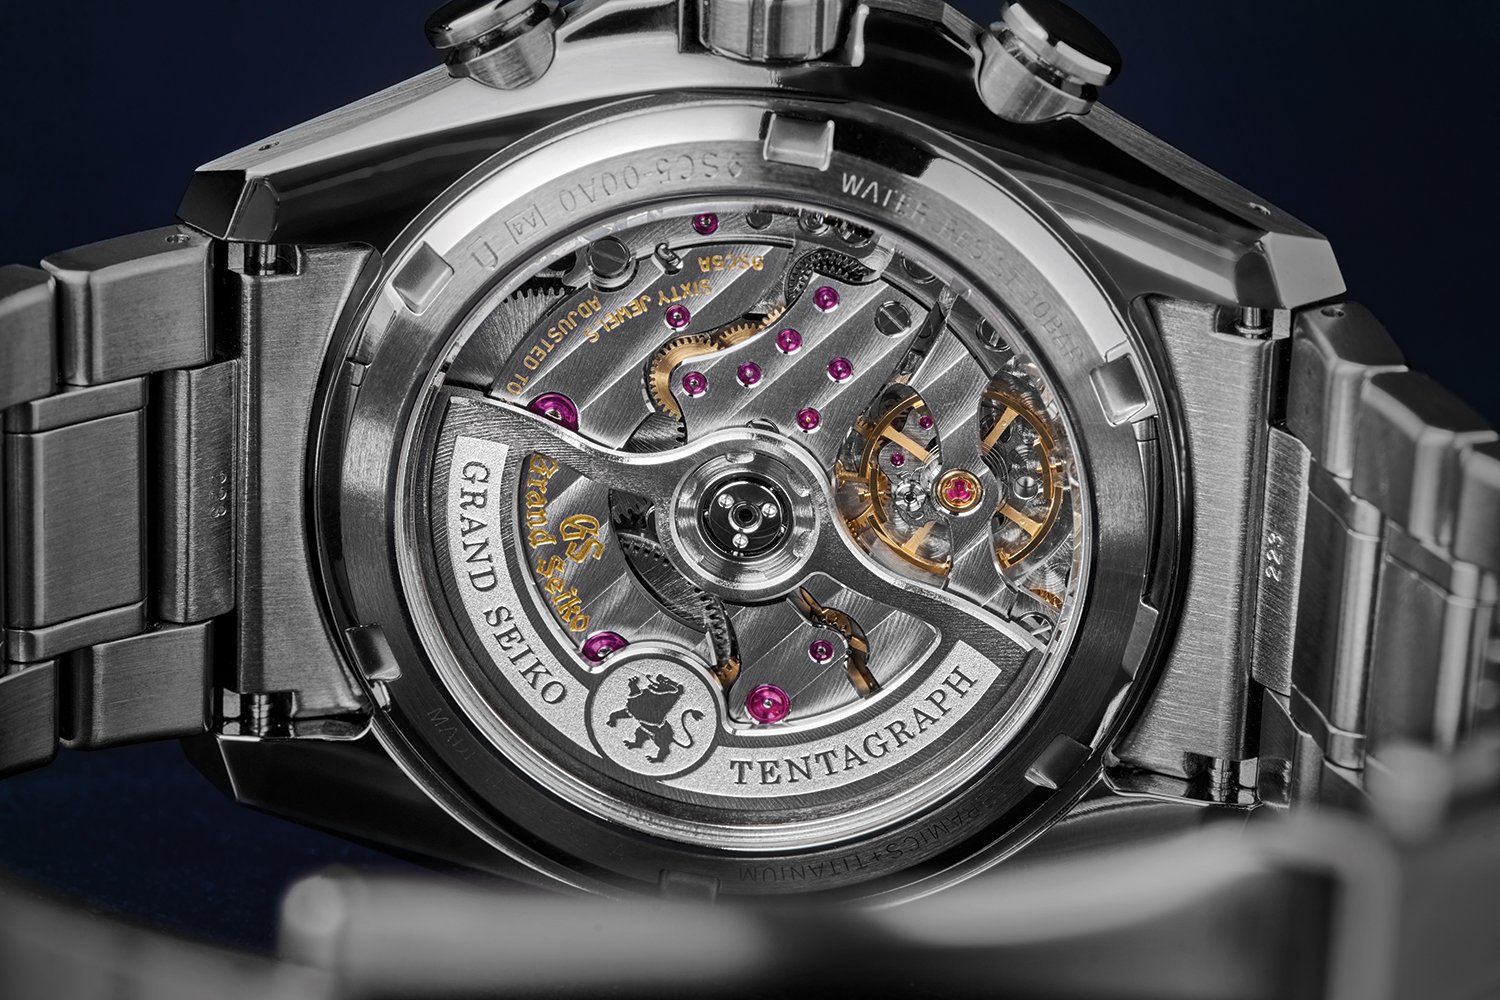 The superb base caliber with four beautifully shaped bridges visible through the sapphire case back